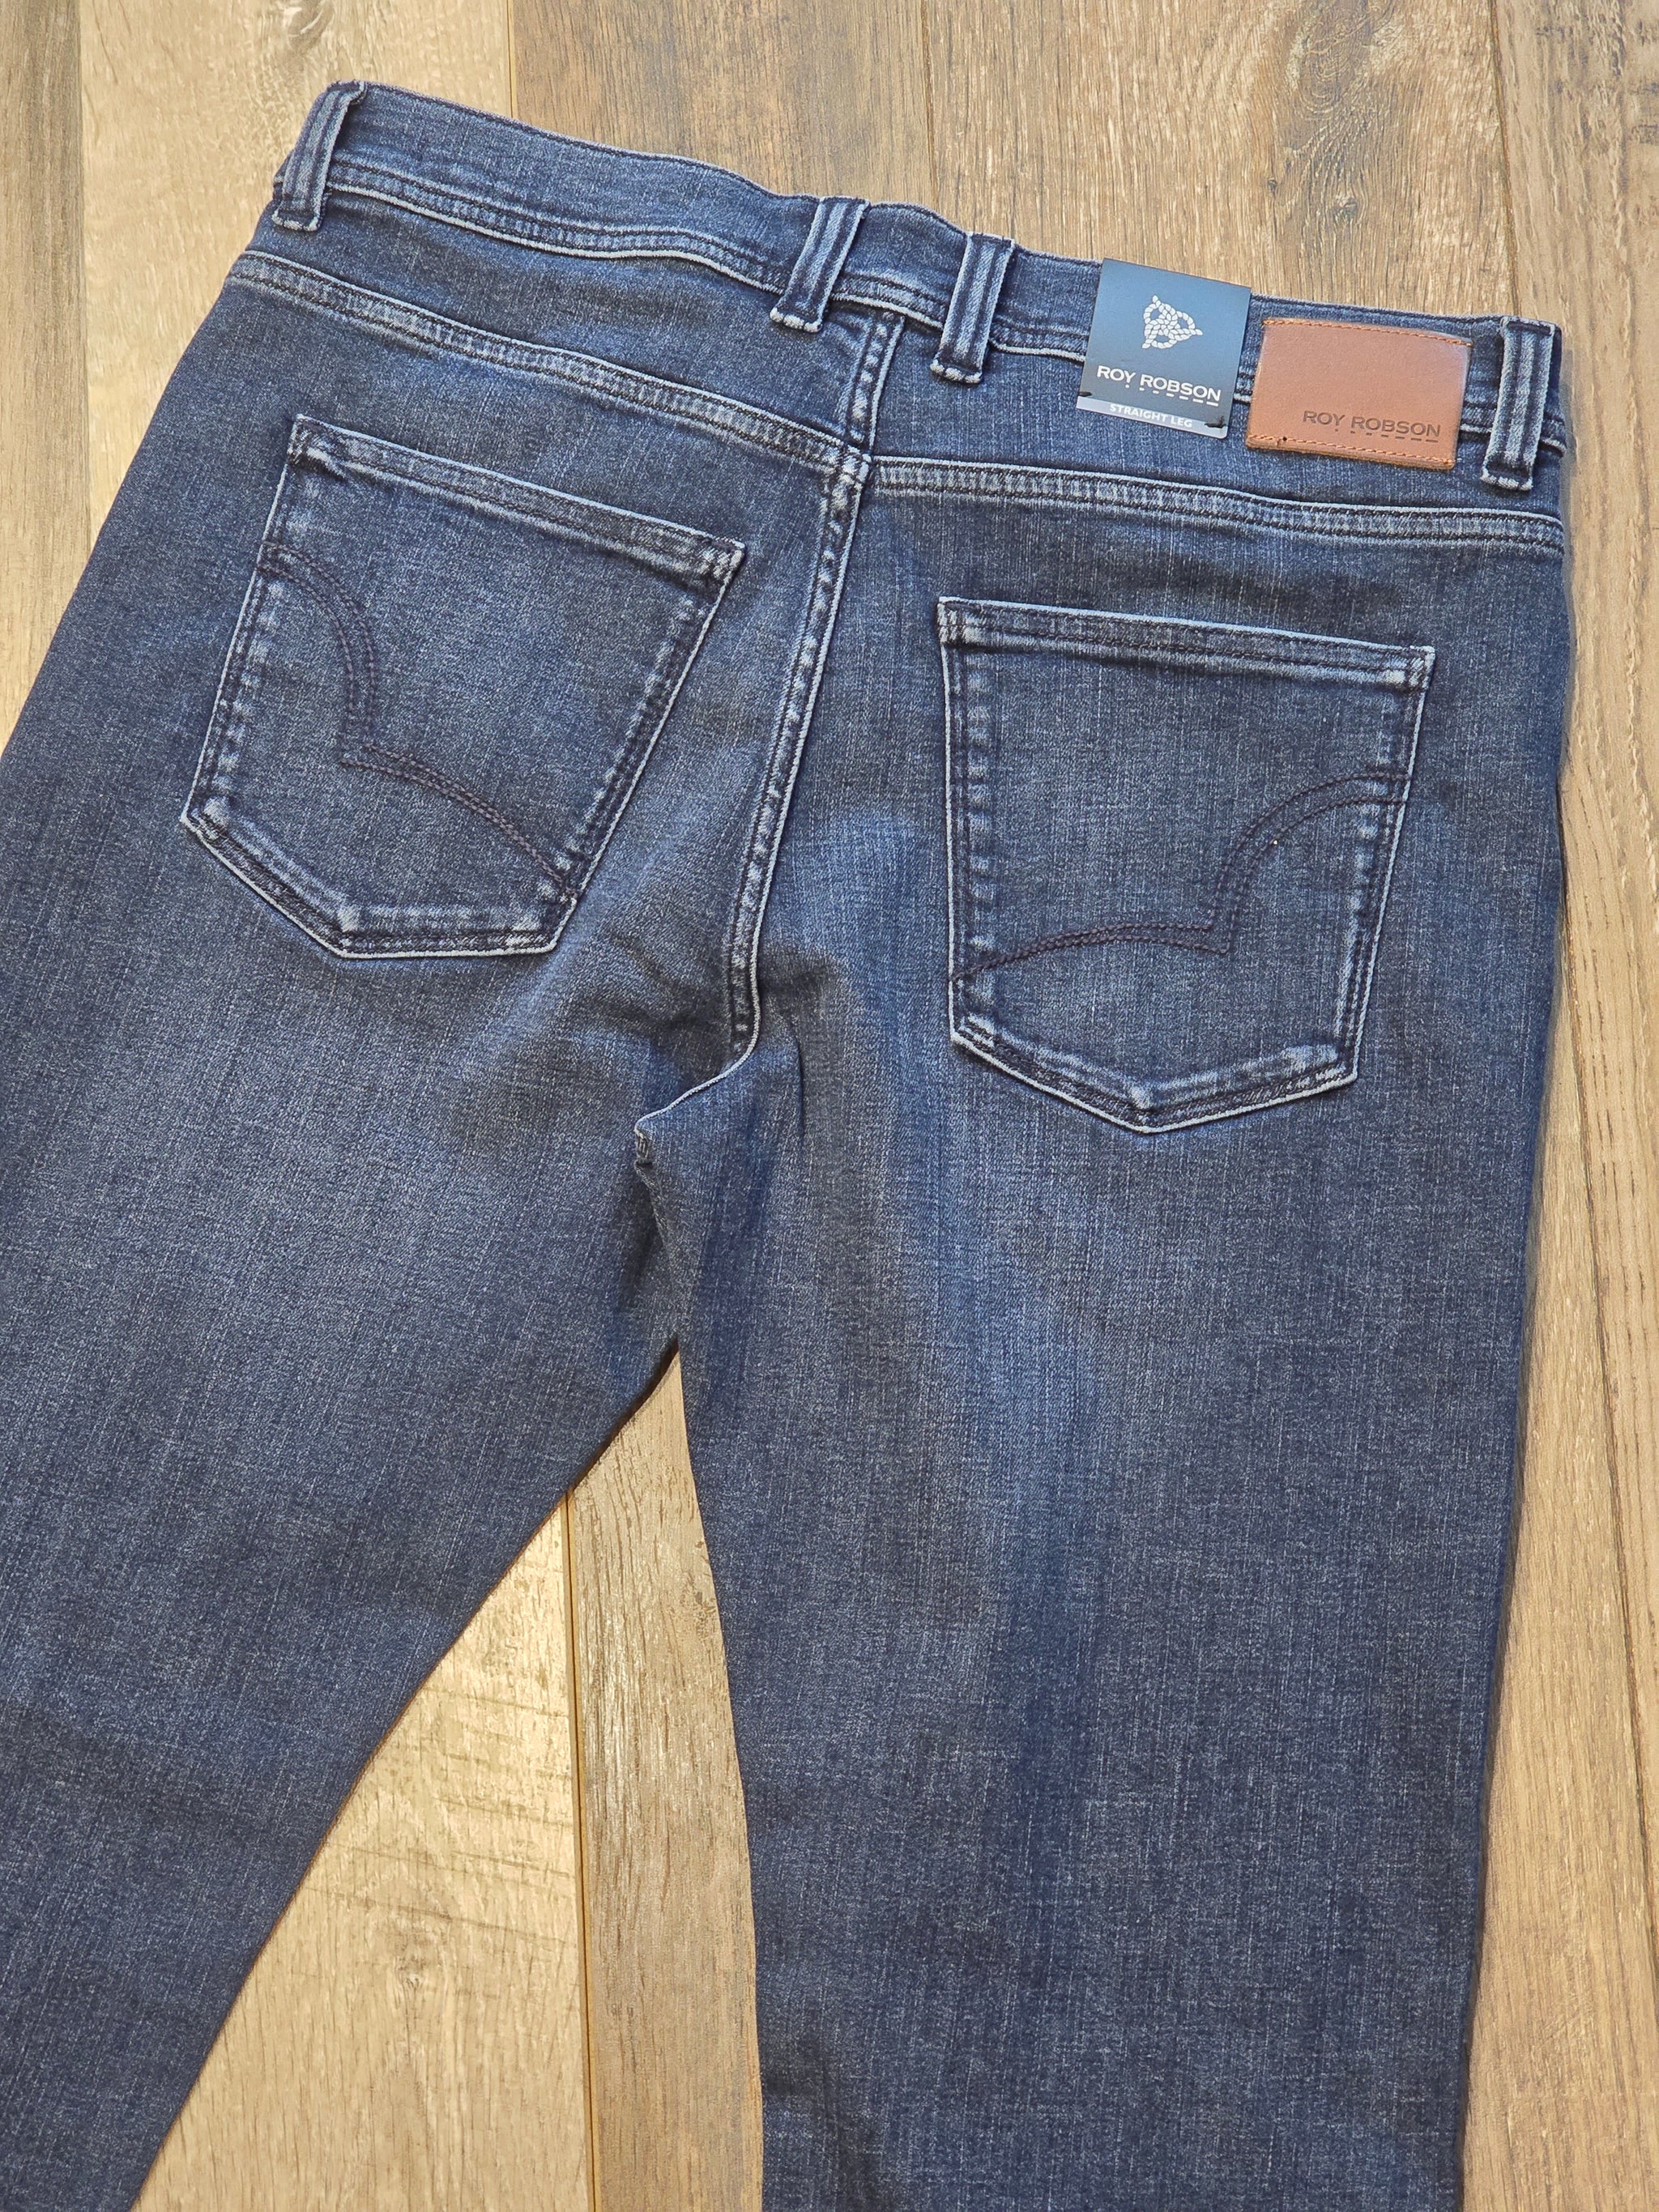 Roy Robson Straight Fit Clean Denim Jeans